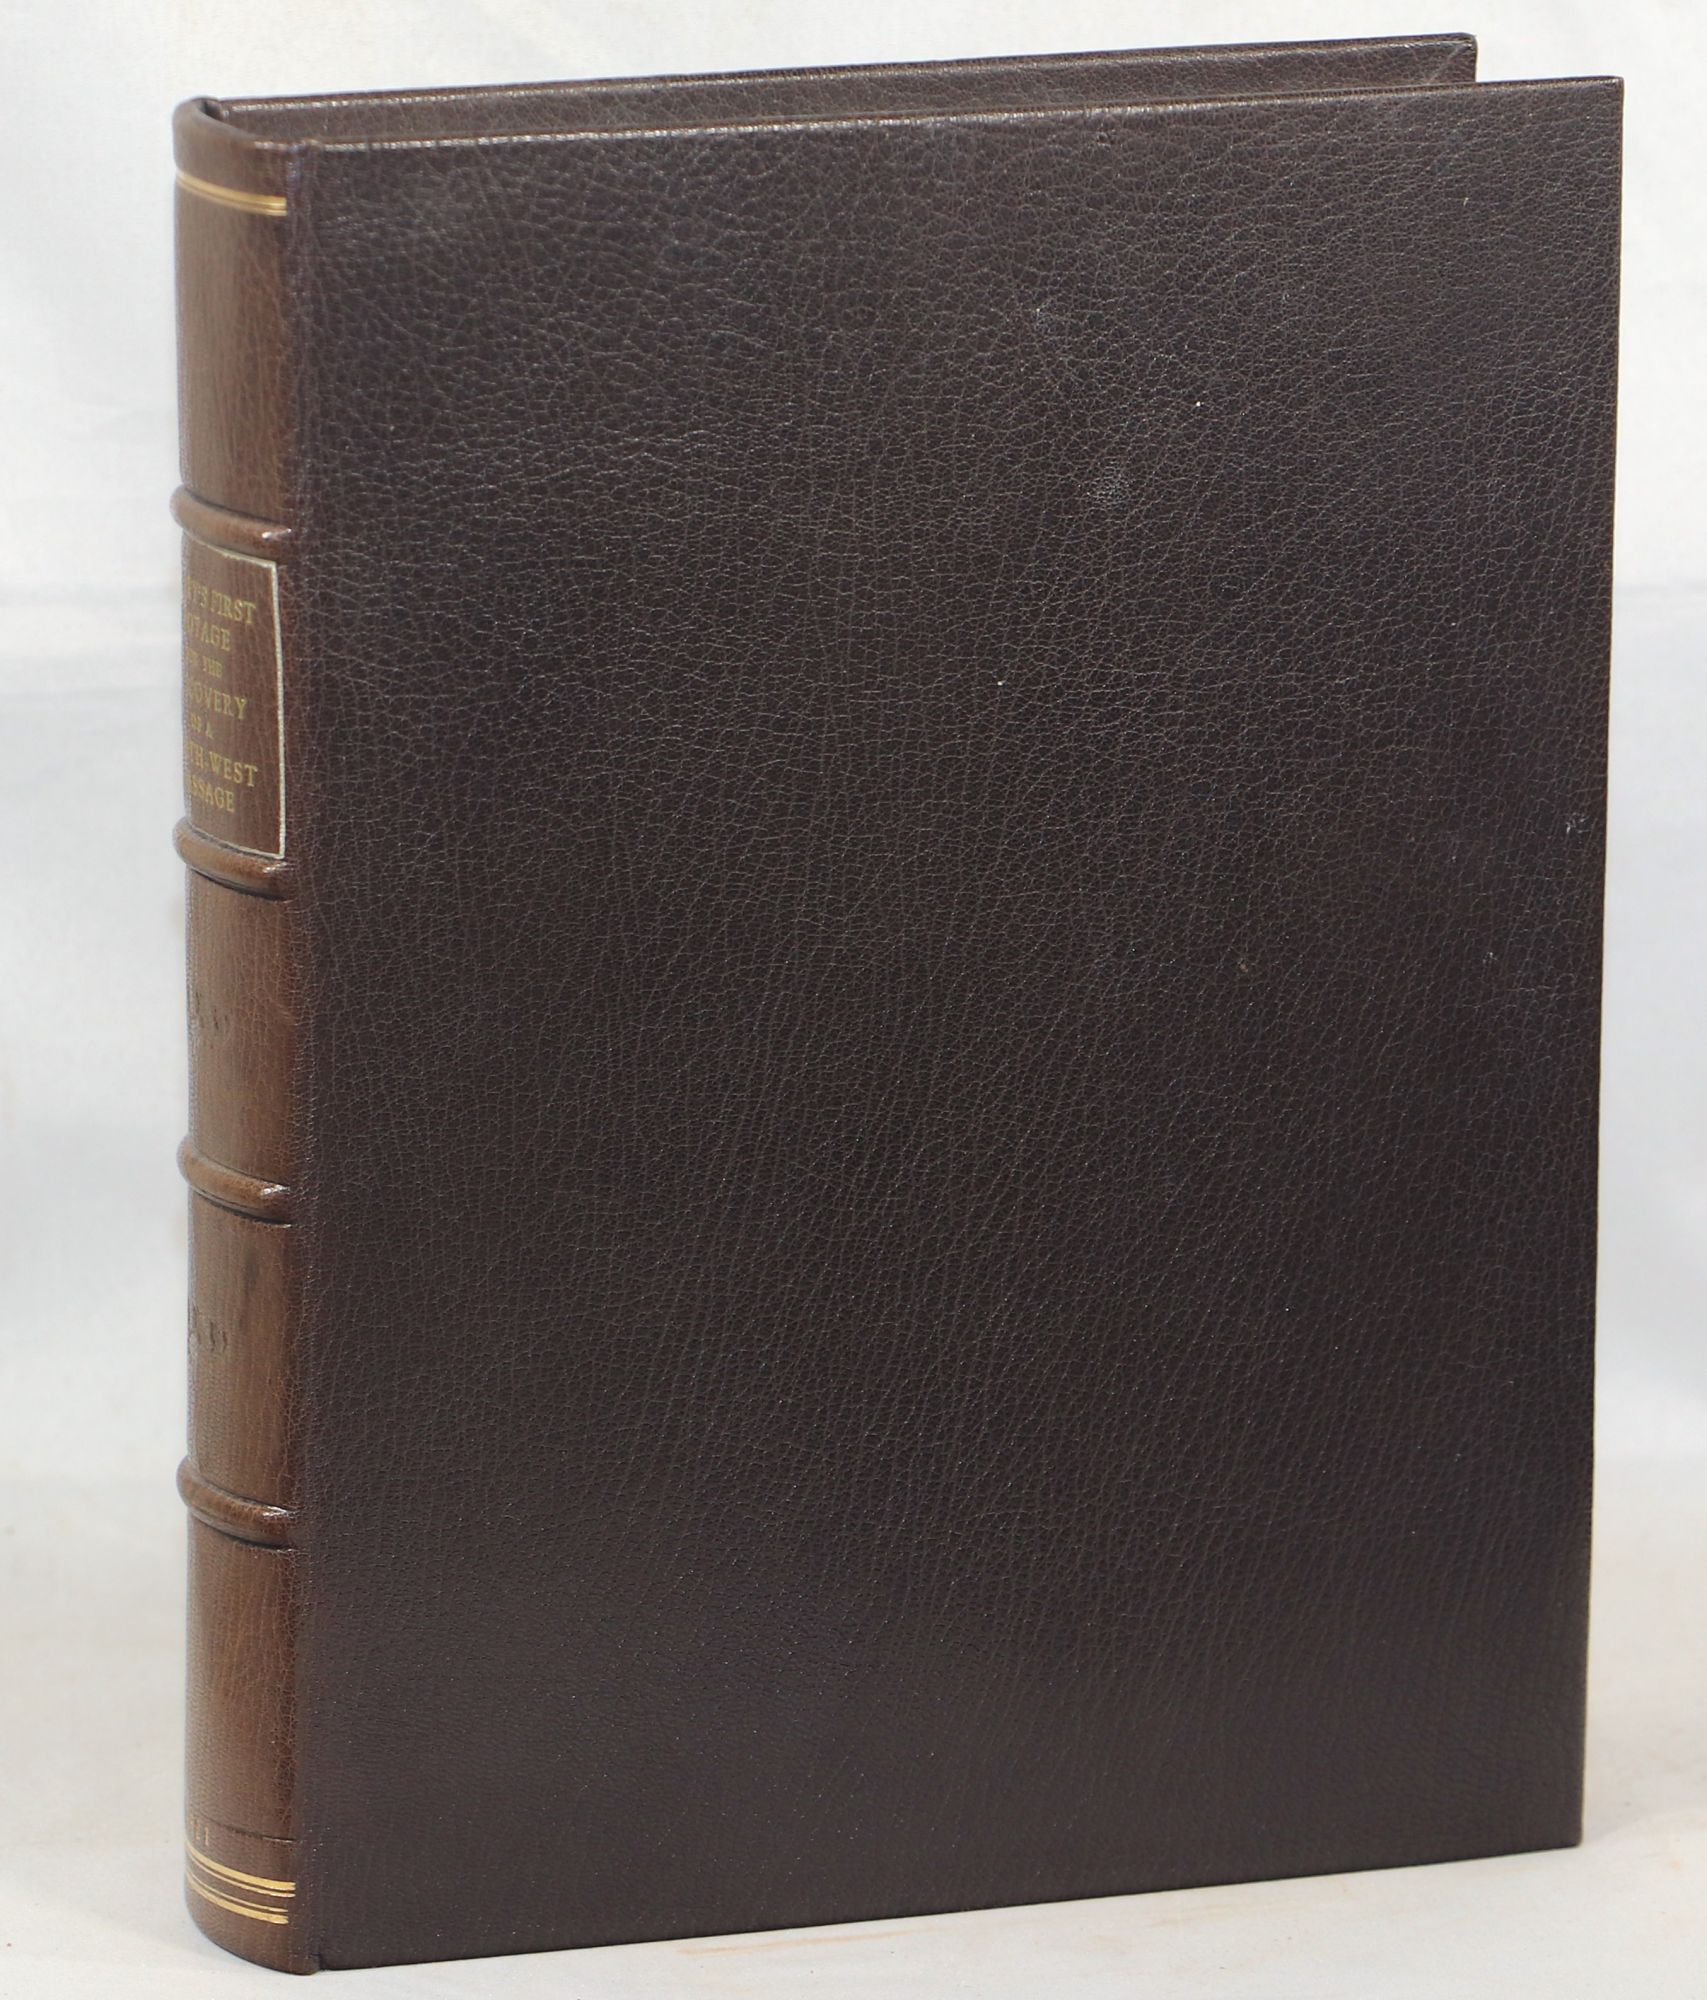 Journal of a Voyage for the Discovery of a North-West Passage from the Atlantic to the Pacific; Performed in the Years 1819-20 in His Majesty's Ships Hecla and Griper - Parry, William Edward